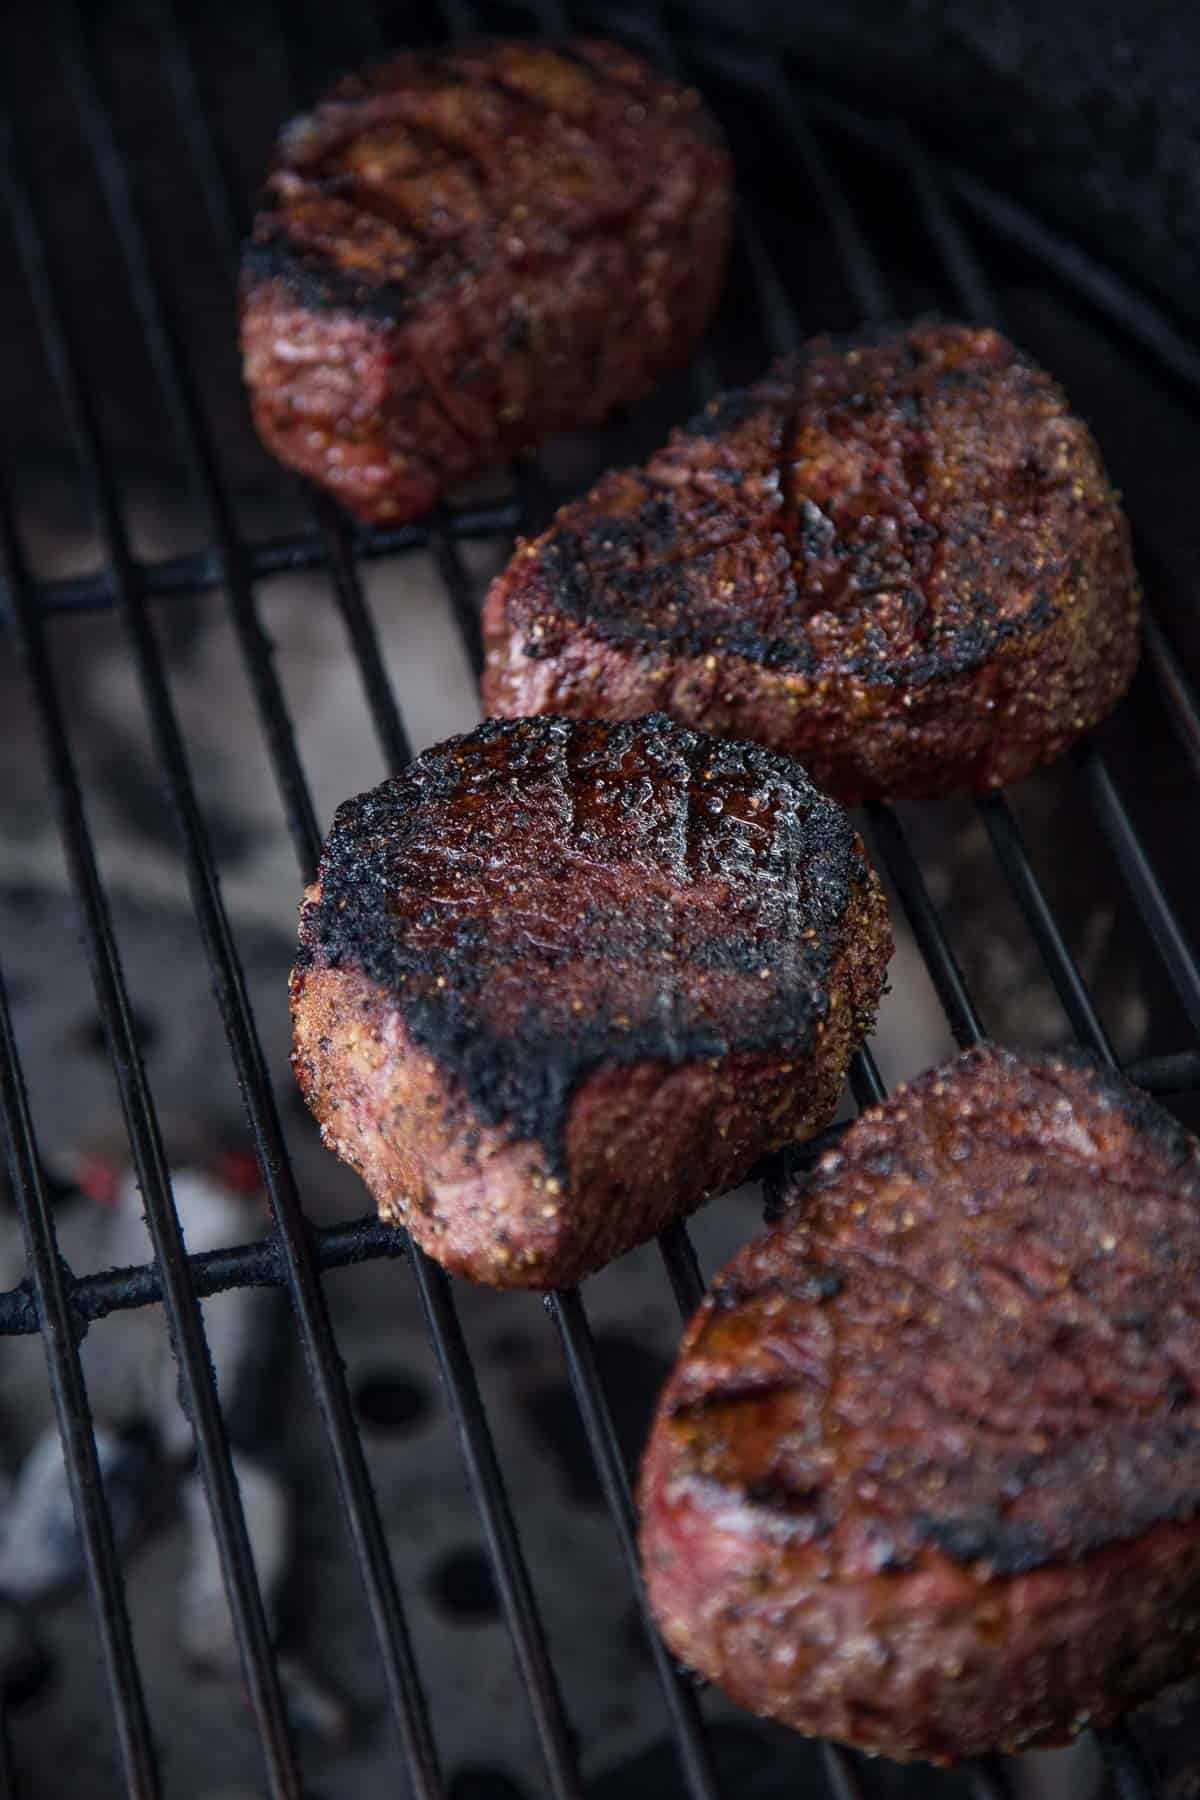 Four filet mignon steaks cooking on the grill